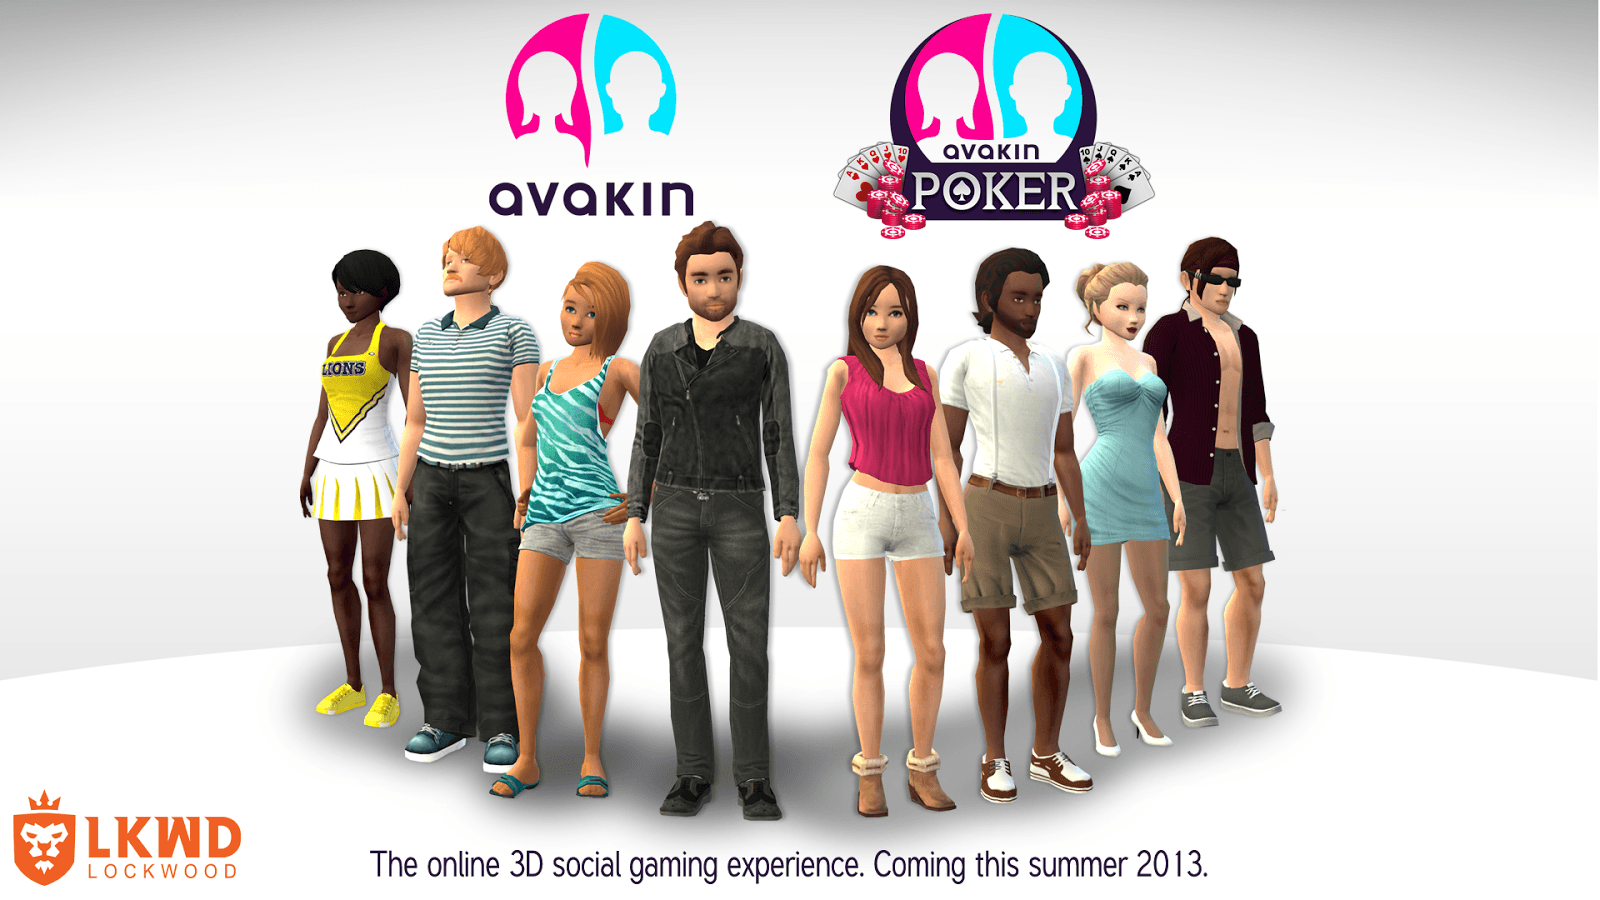 avakin life pictures